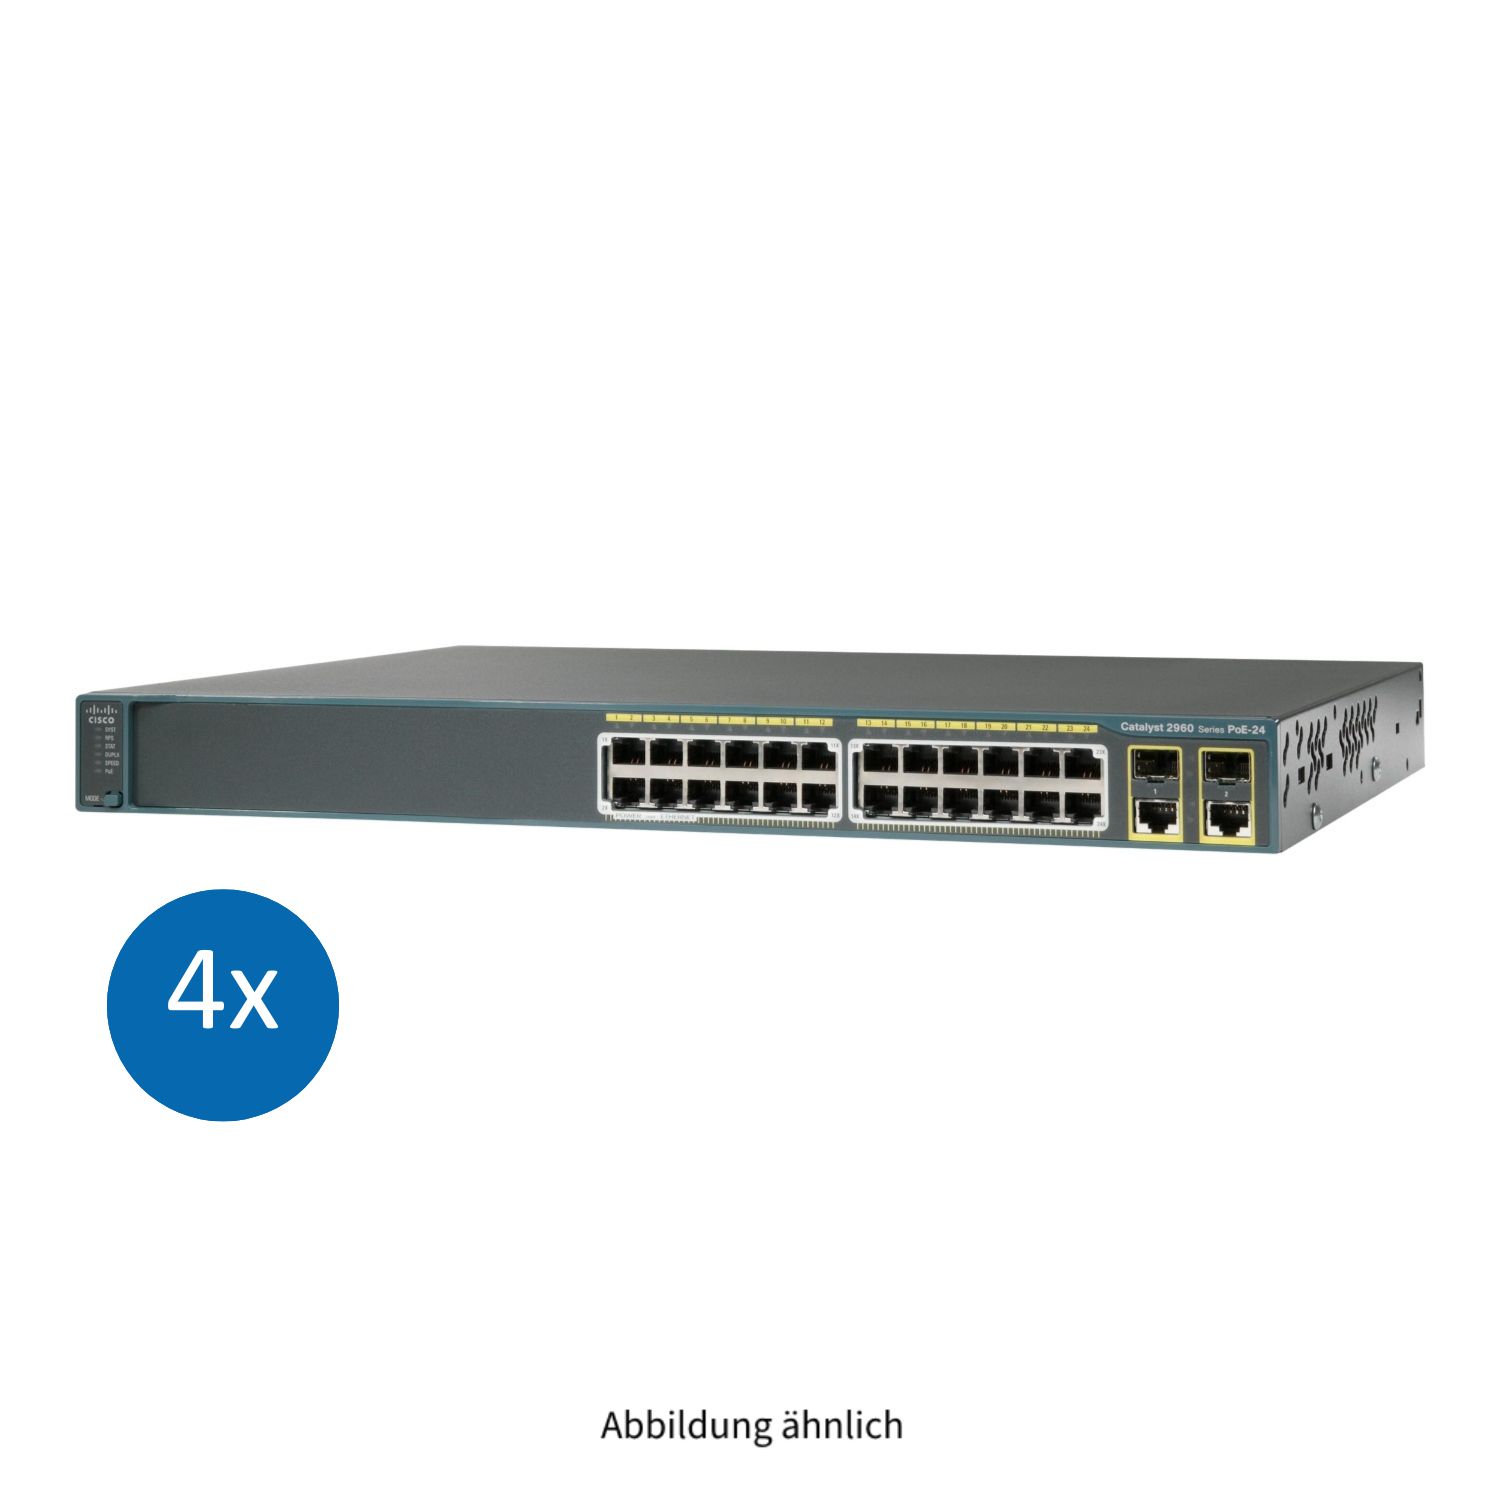 4x Cisco Catalyst 2690-Plus 24x 100Base-T PoE 2x Shared SFP 1GbE Managed Switch WS-C2960-24PC-S